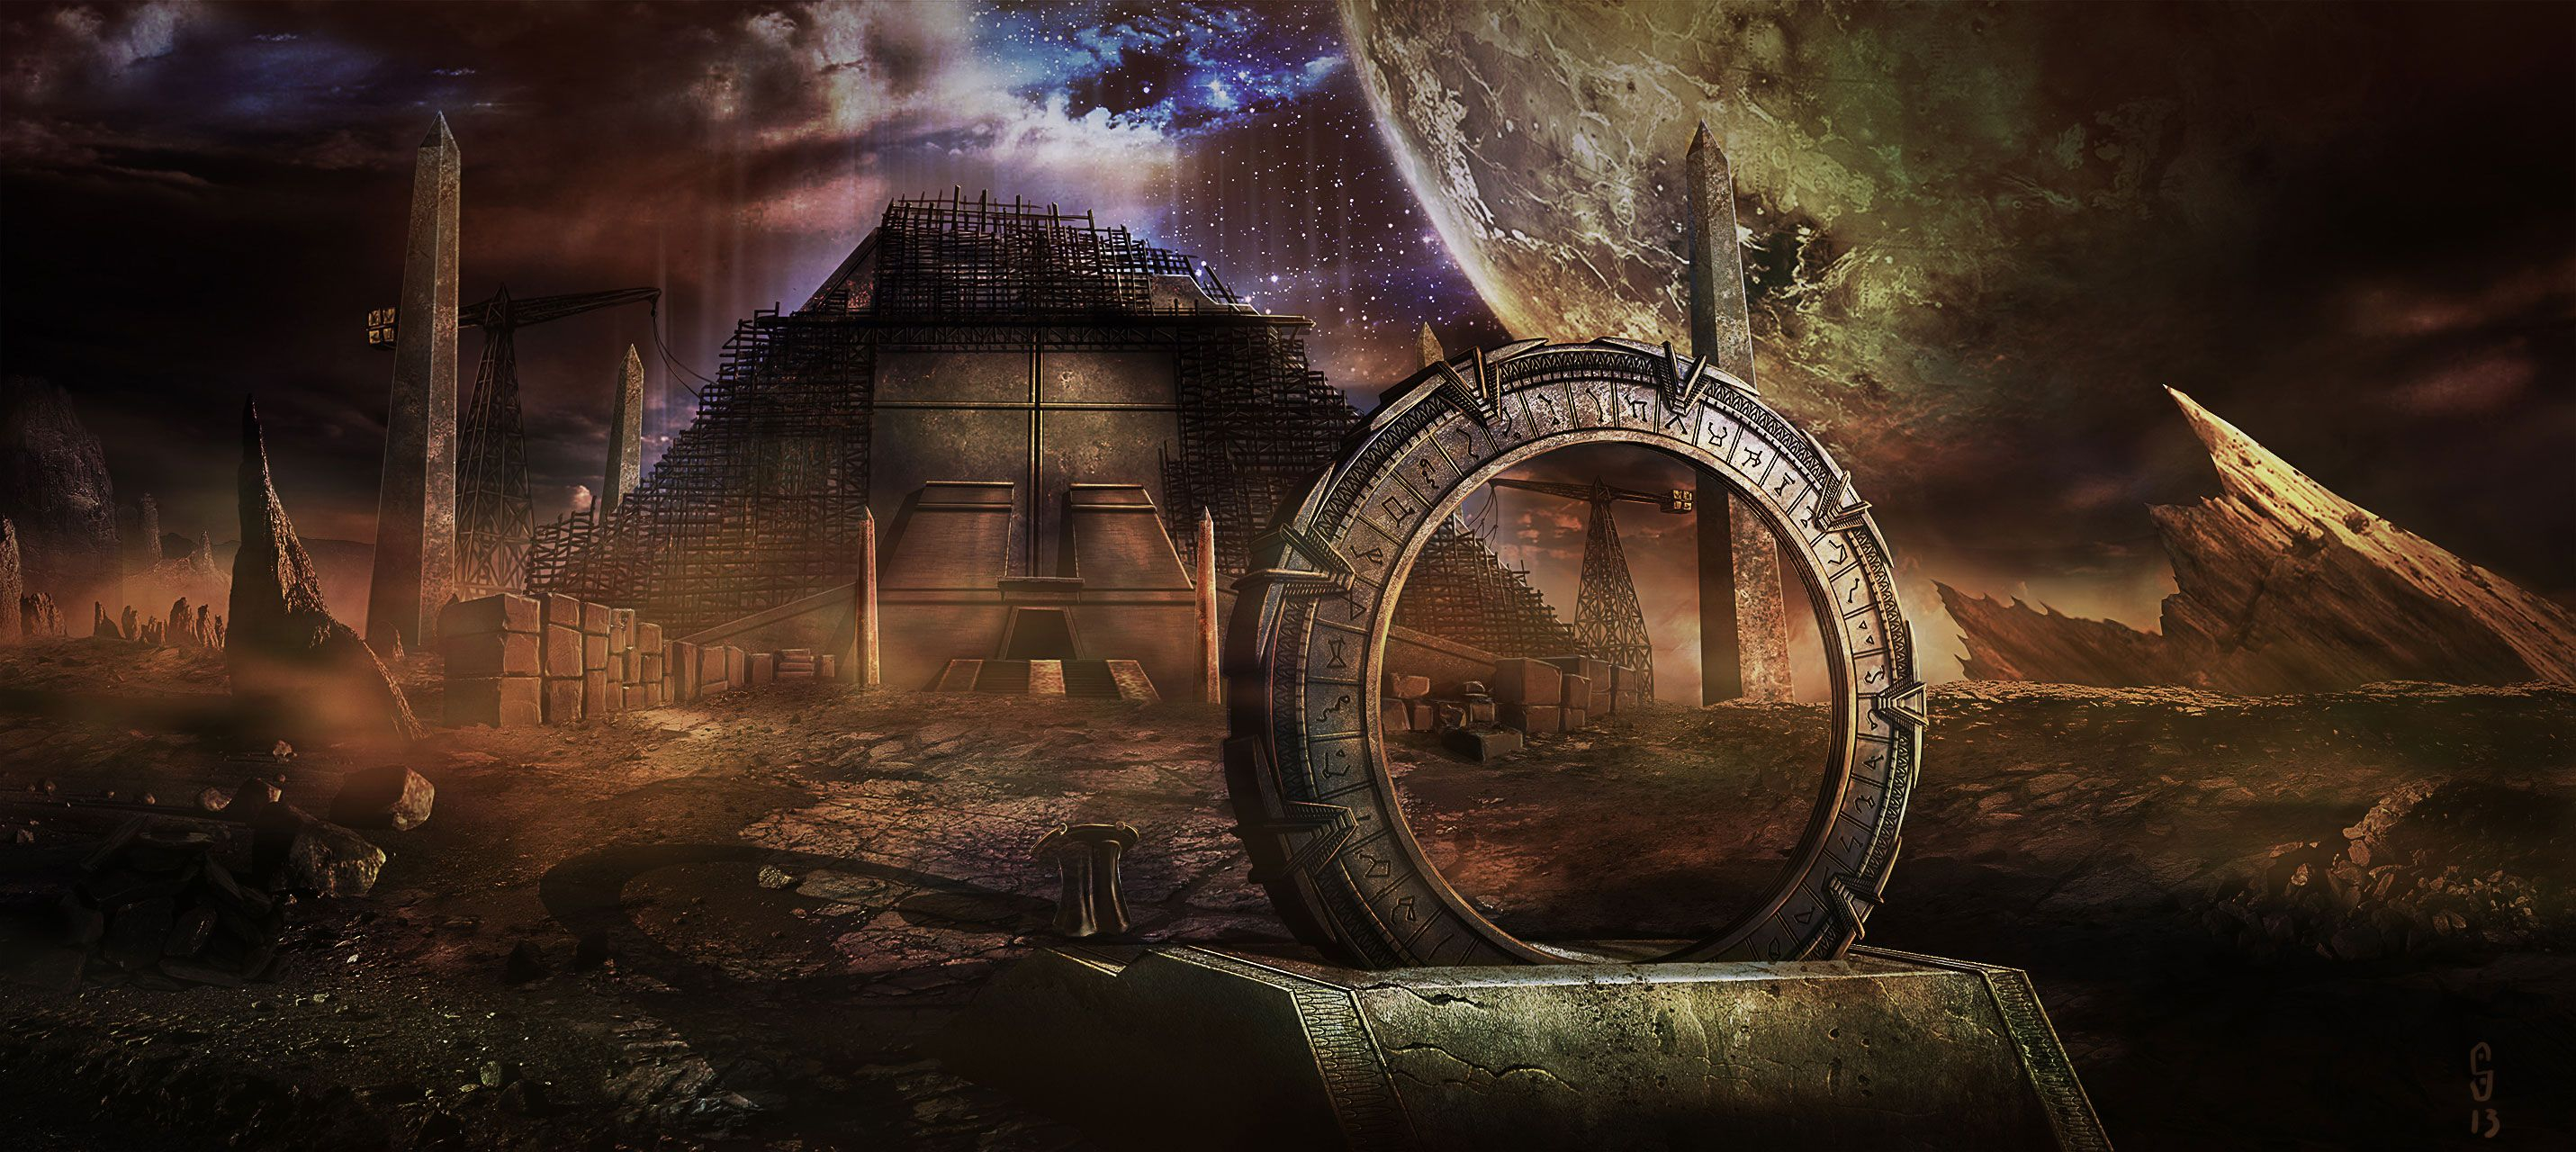 2862x1280 Stargate Wallpapers Top Free Stargate Backgrounds